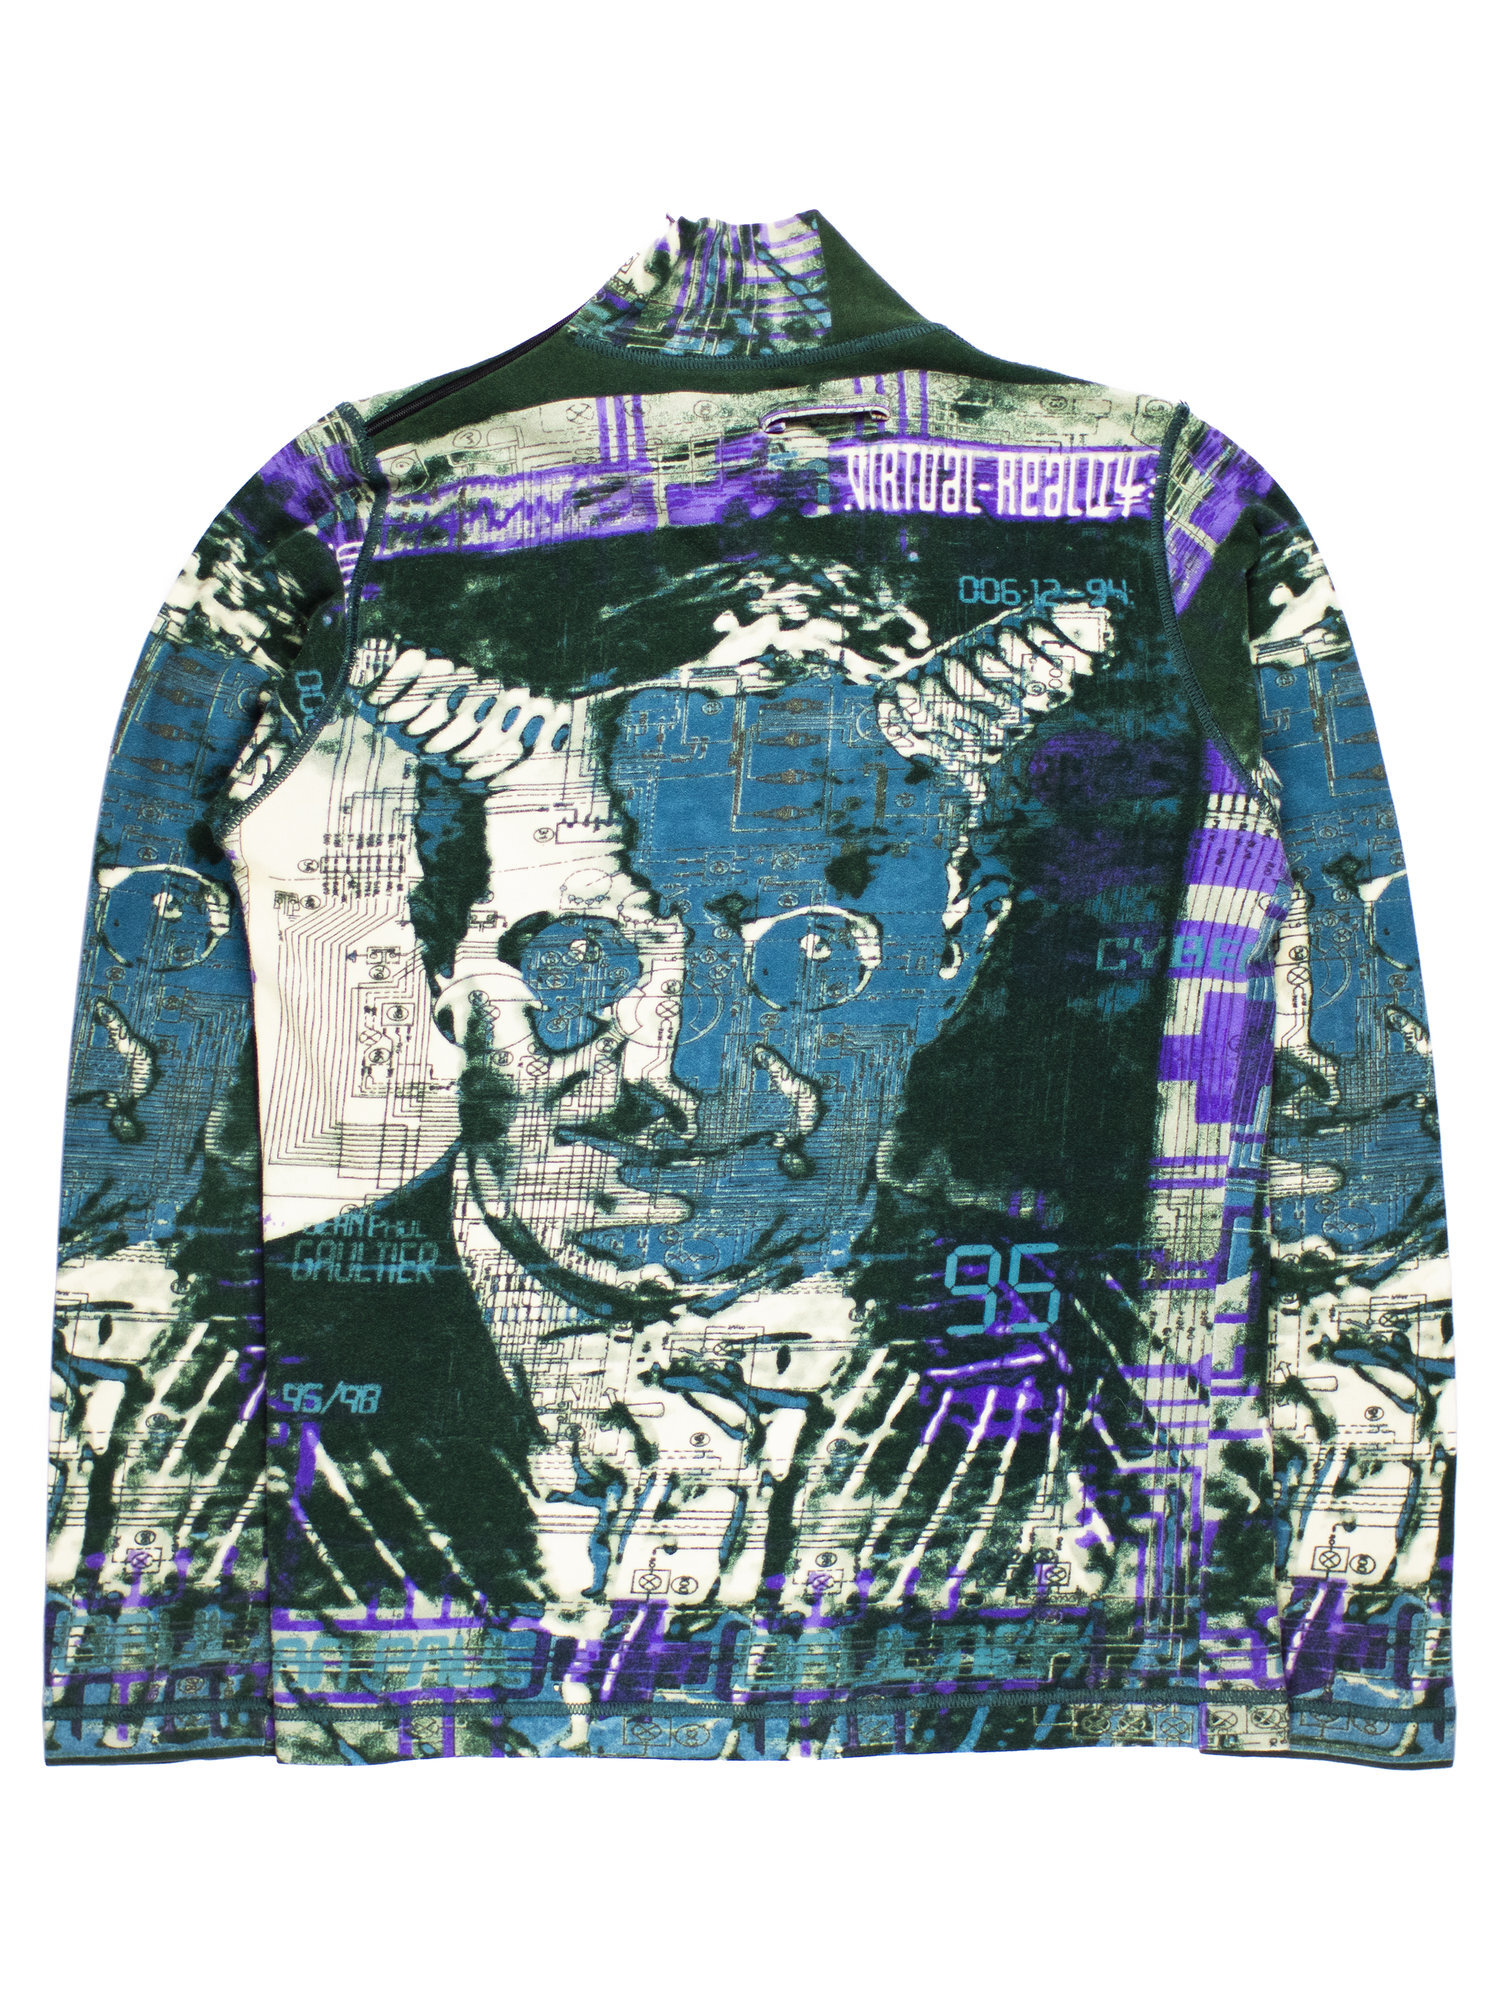 Jean Paul Gaultier AW1995 Virtual Reality Top — Middleman Store